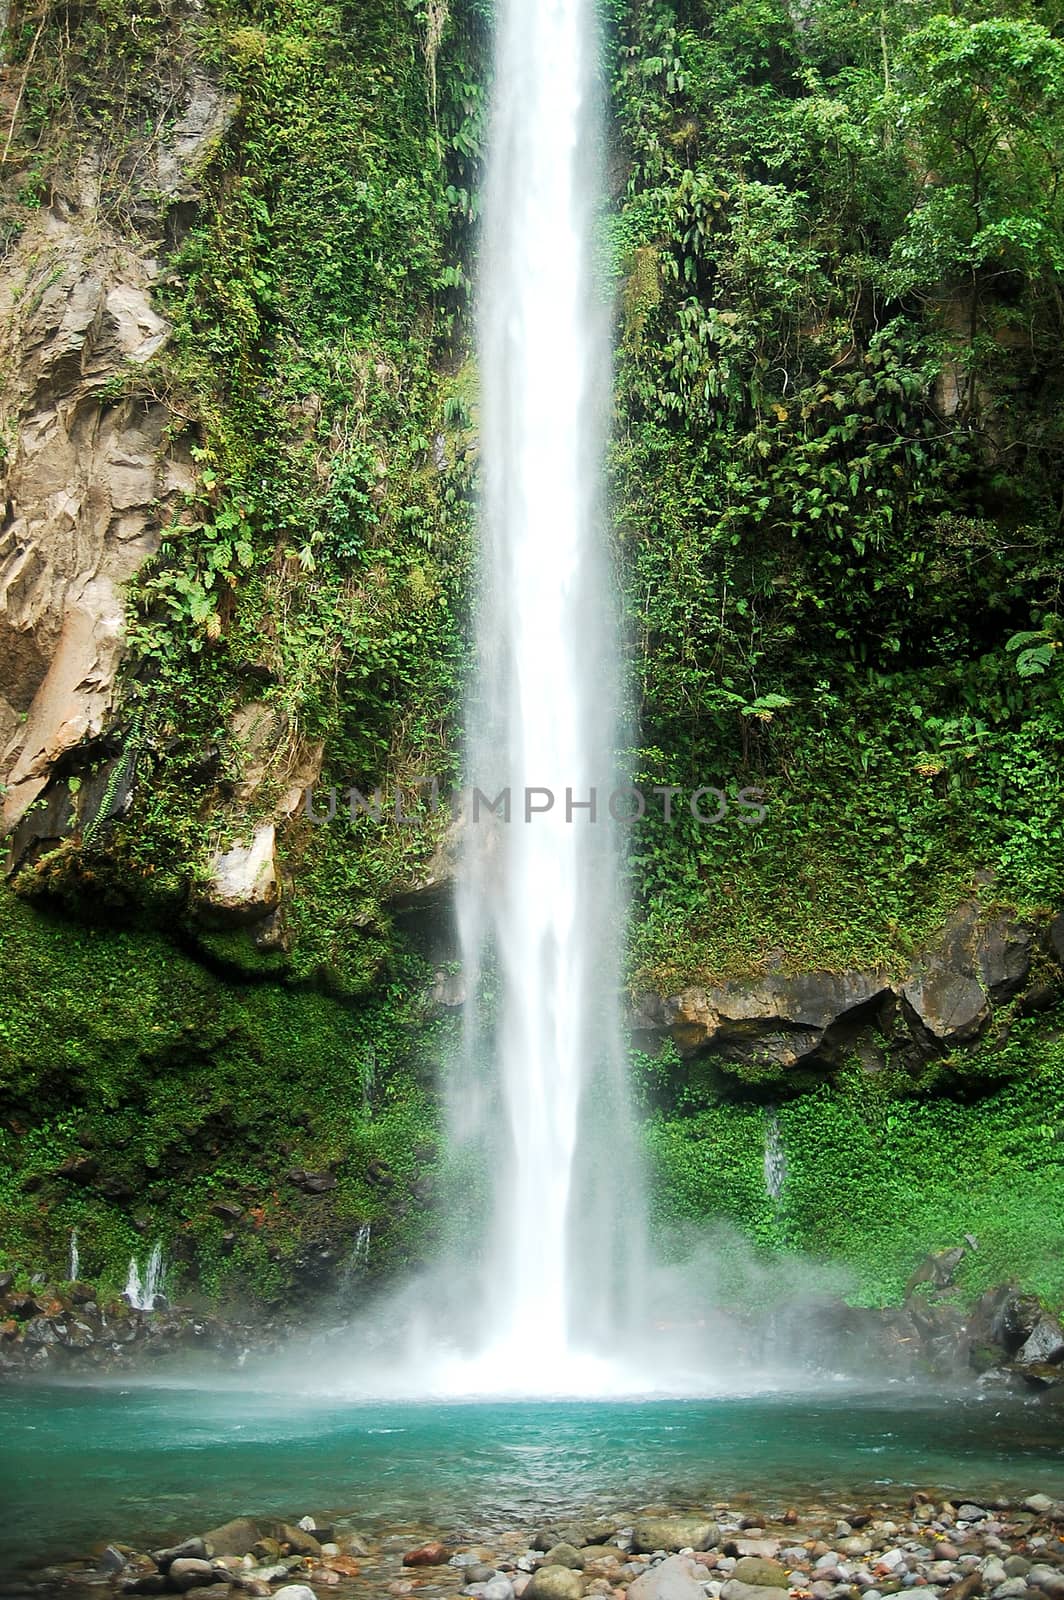 Katibawasan water falls and green leaves in Camiguin, Philippines